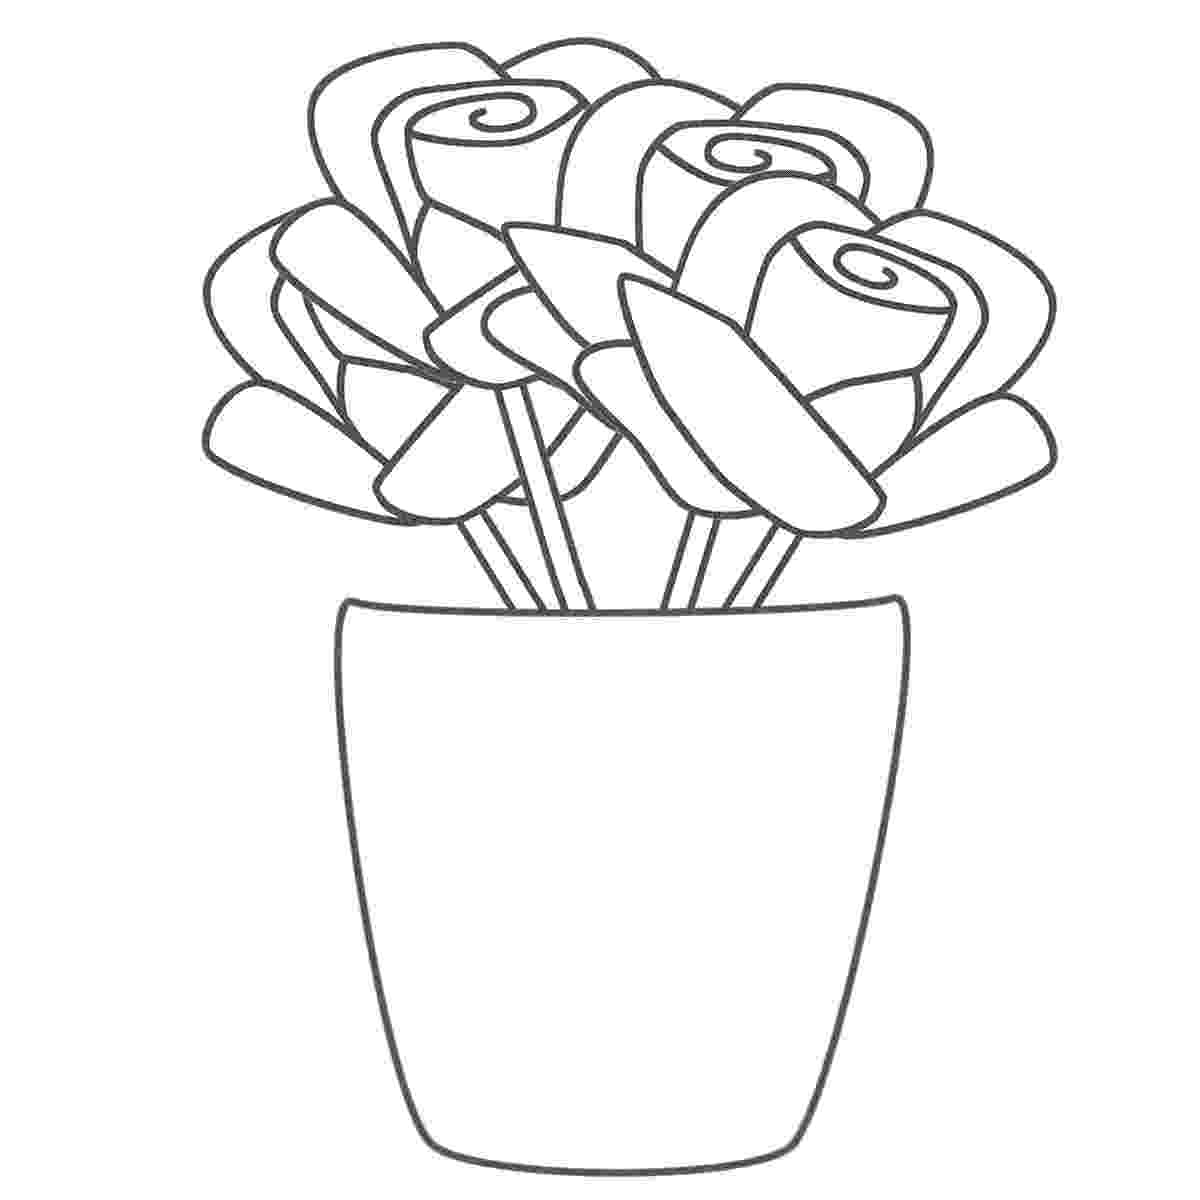 printable rose coloring pages rose coloring page free printable coloring pages printable rose coloring pages 